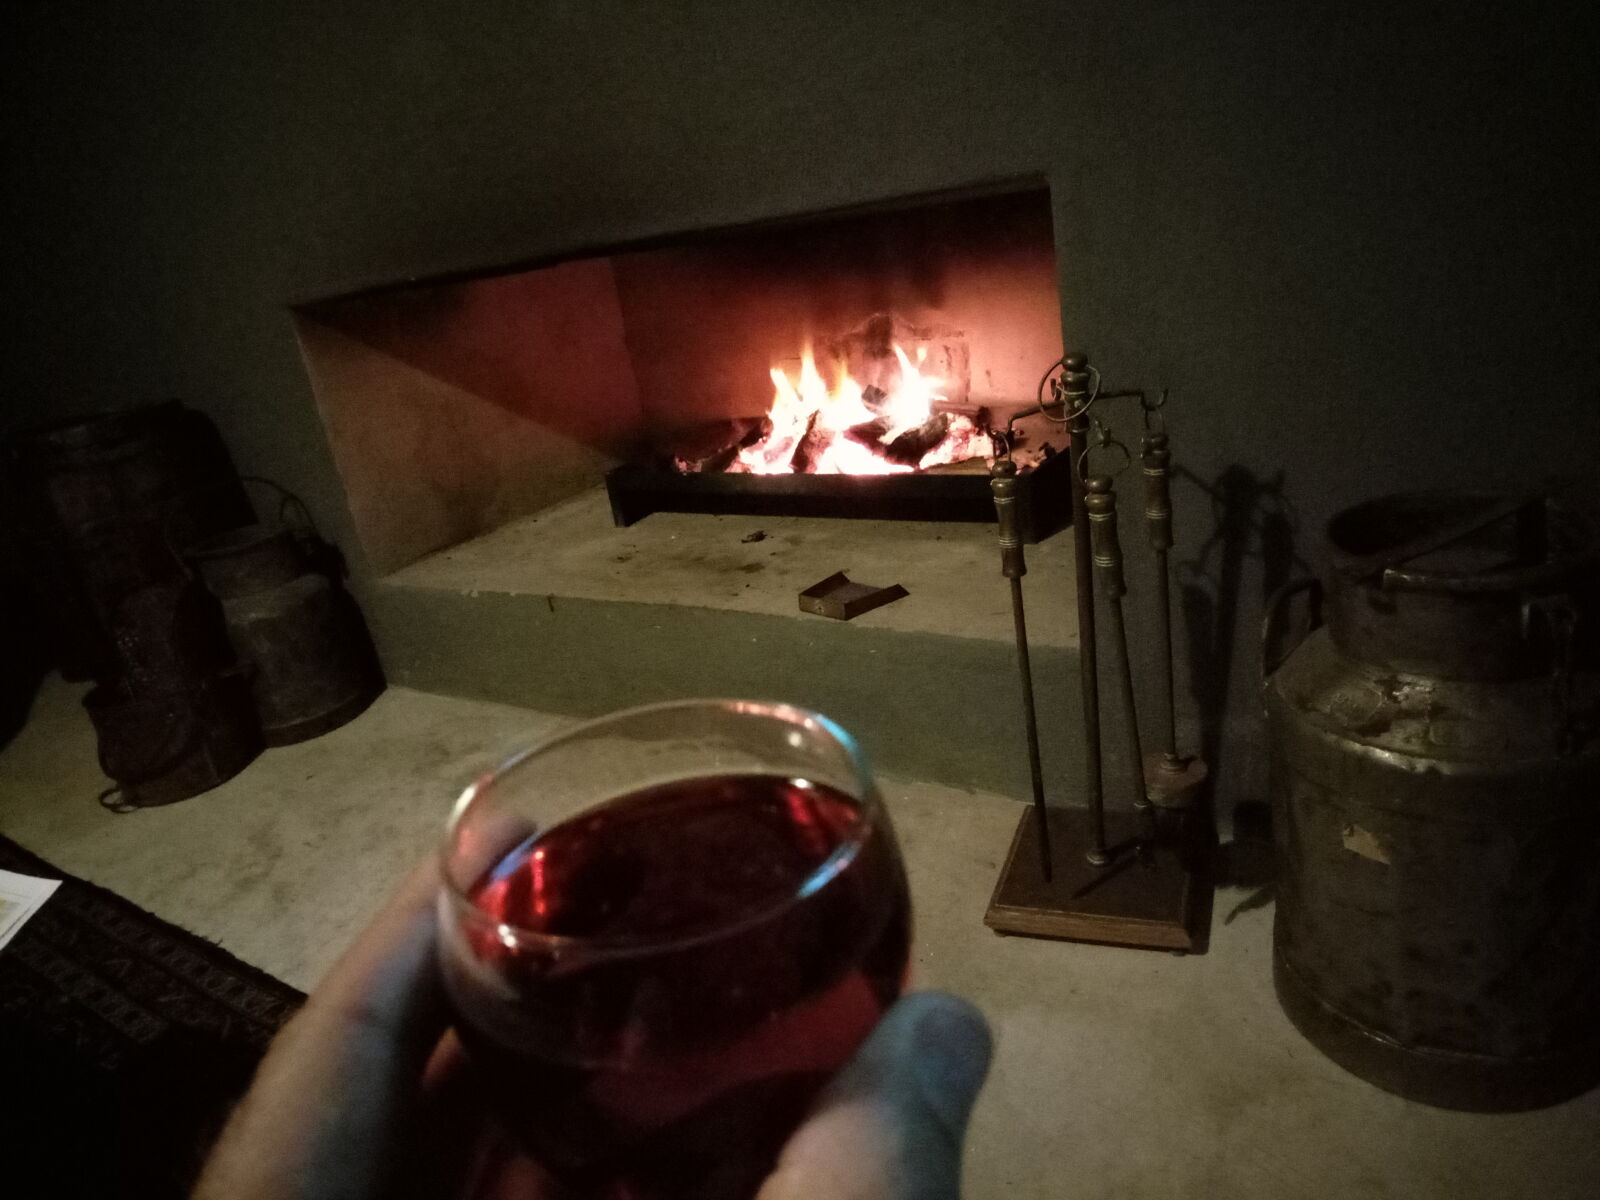 Meizu PRO 6 sample photo. Cosy, fireplace, red, wine photography